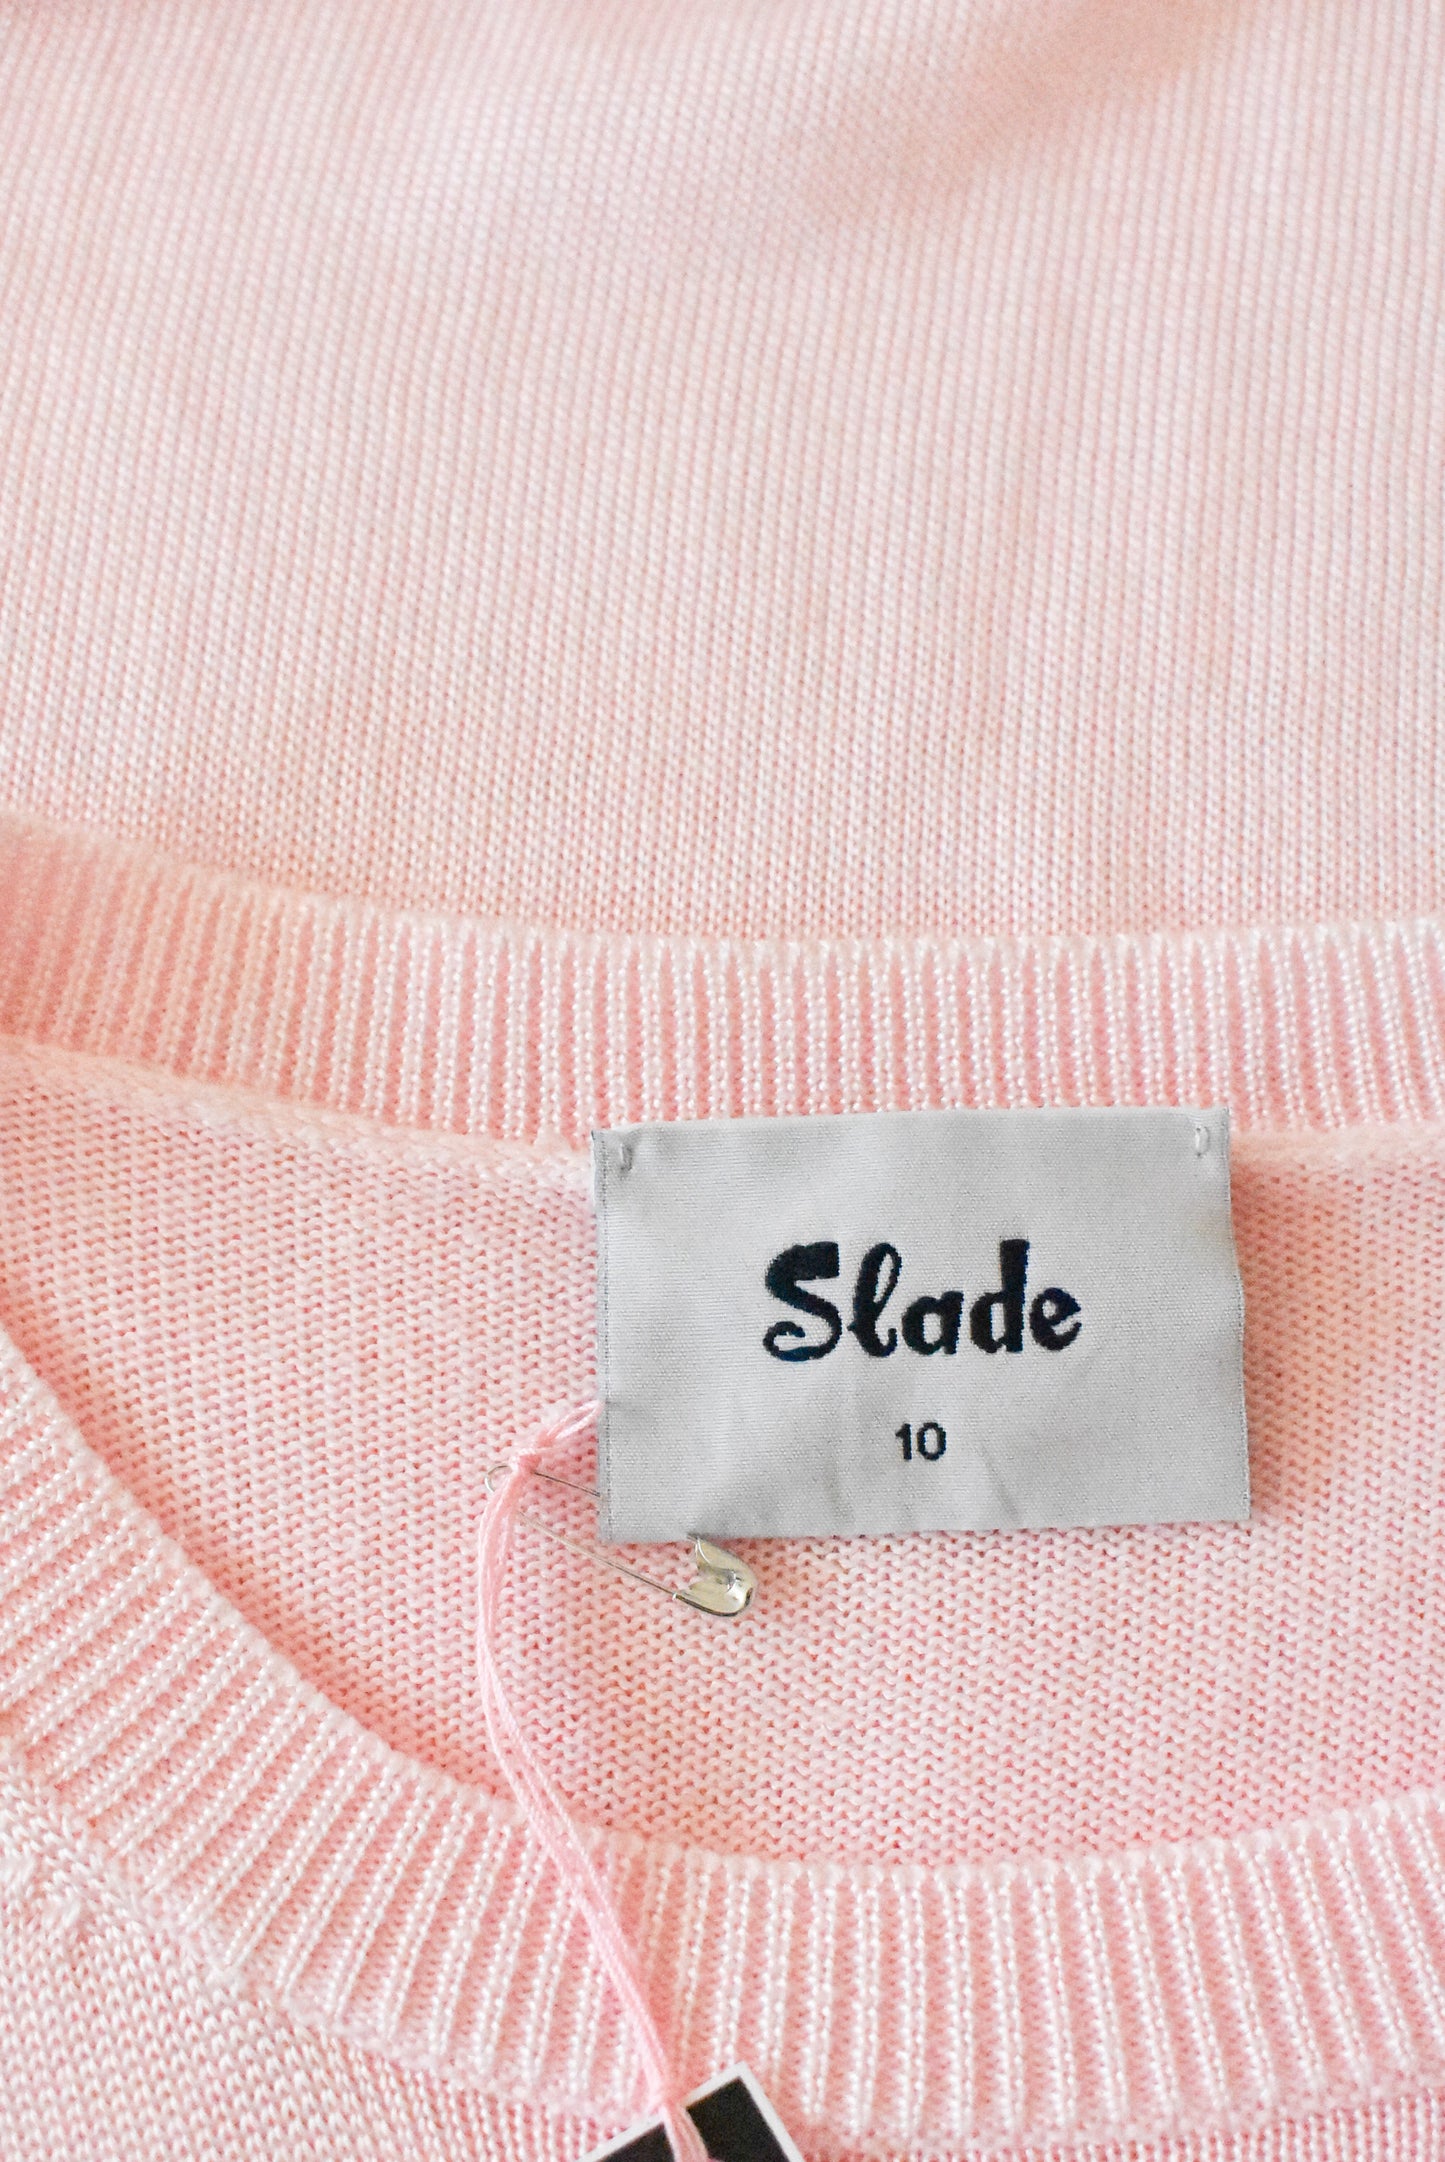 Slade retro-style baby pink knit, size 10